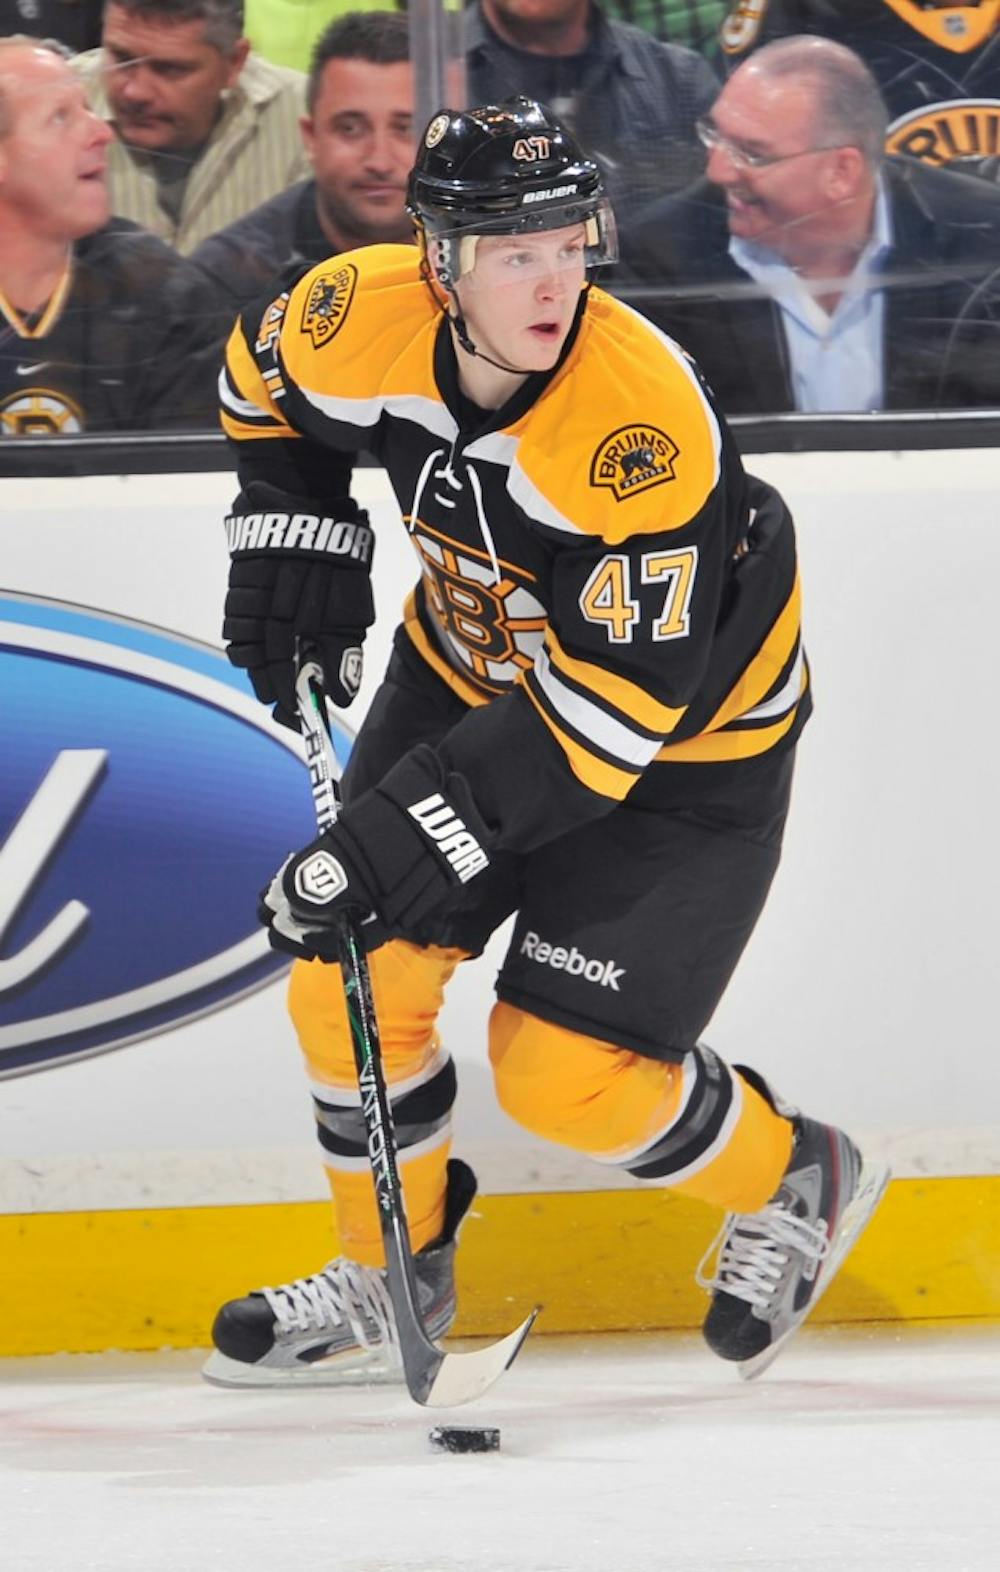 Torey Krug #47 of the Boston Bruins skates with the puck against the Pittsburgh Penguins at the TD Garden on April 3, 2012 in Boston, Massachusetts.  Photo courtesy of Steve Babineau/NHLI via Getty Images